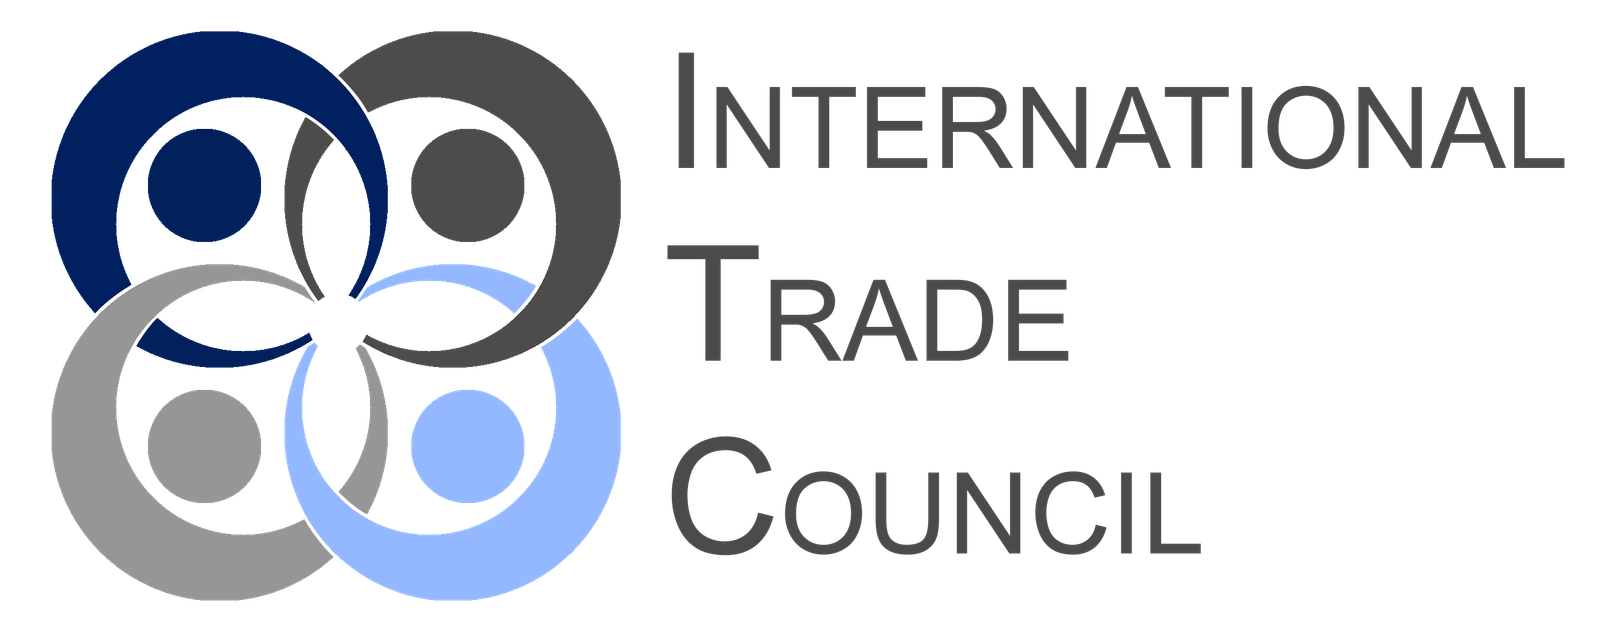 Dynamic defense solutions Member of international trade council